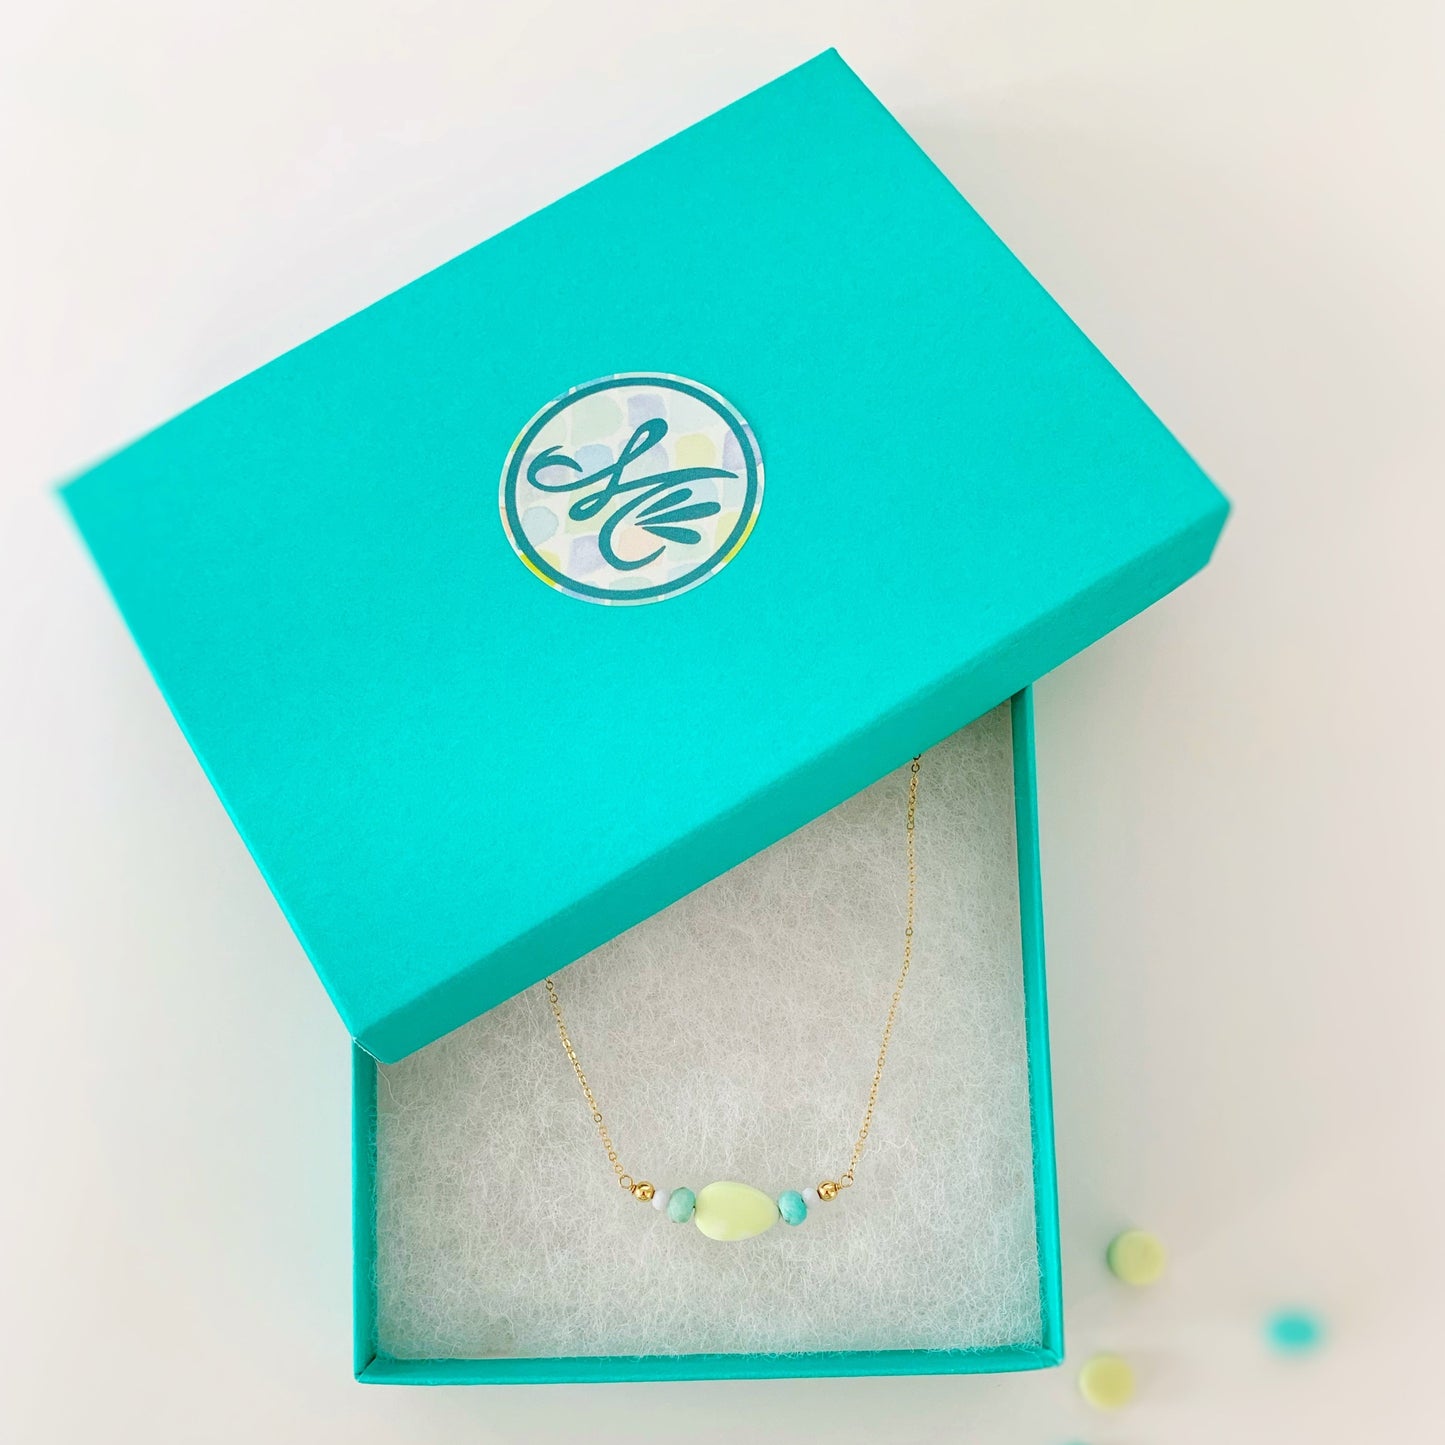 Captiva necklaced pictured in a Mermaids and Madeleines branded box that's cotton lined and teal color. photographed on a white background